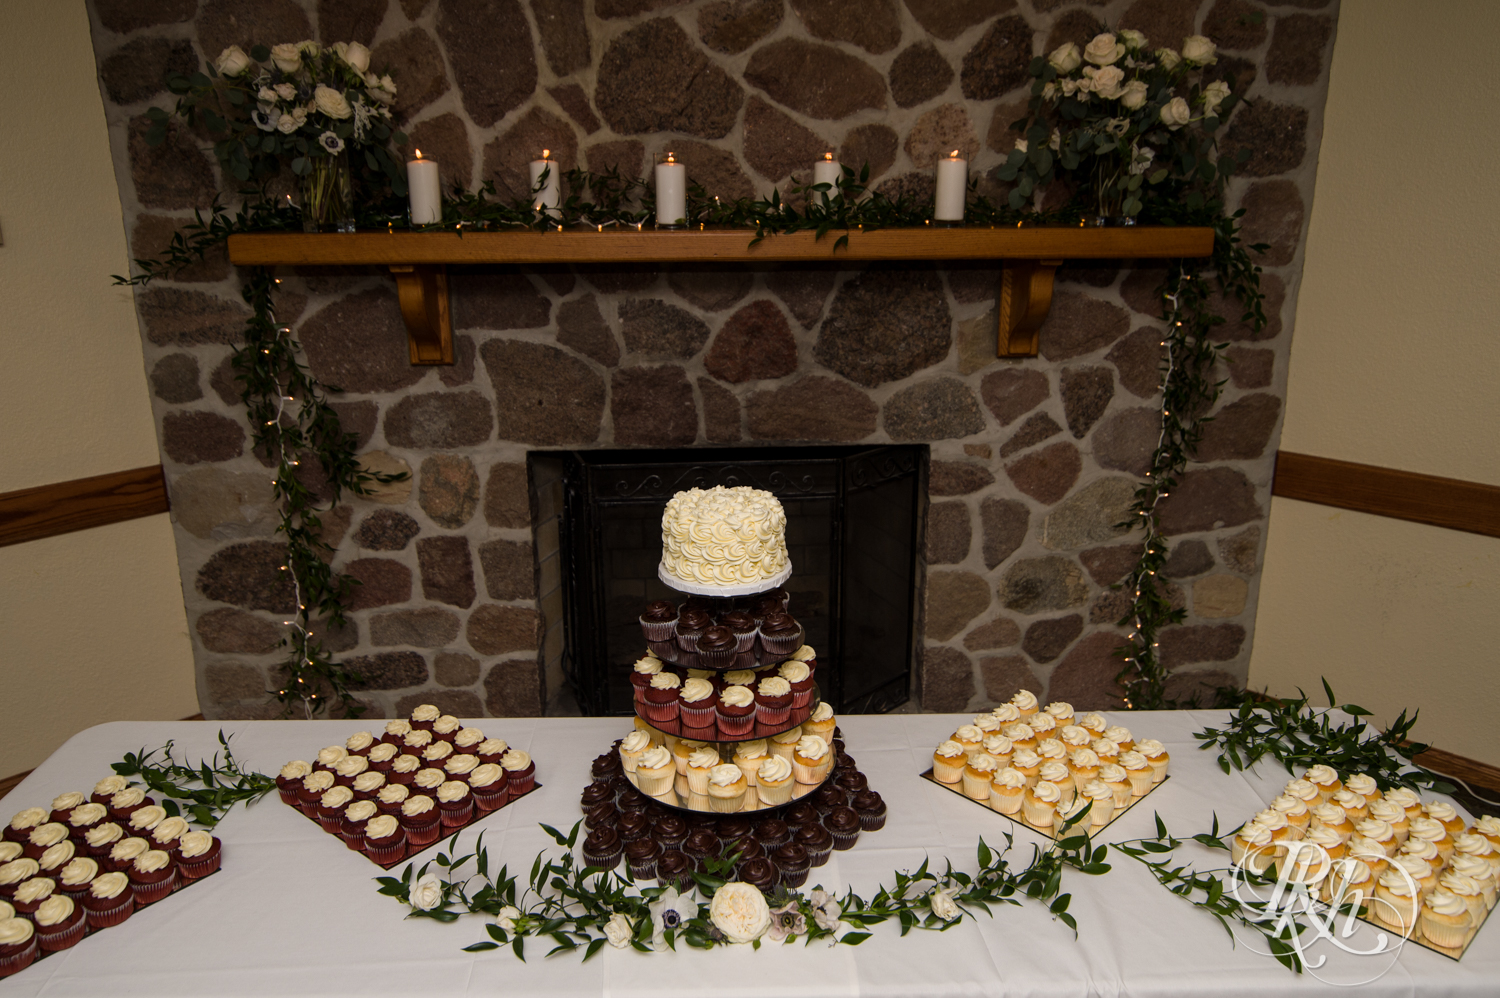 Desert table with cake and cupcakes at Oak Glen Golf Course in Stillwater, Minnesota.